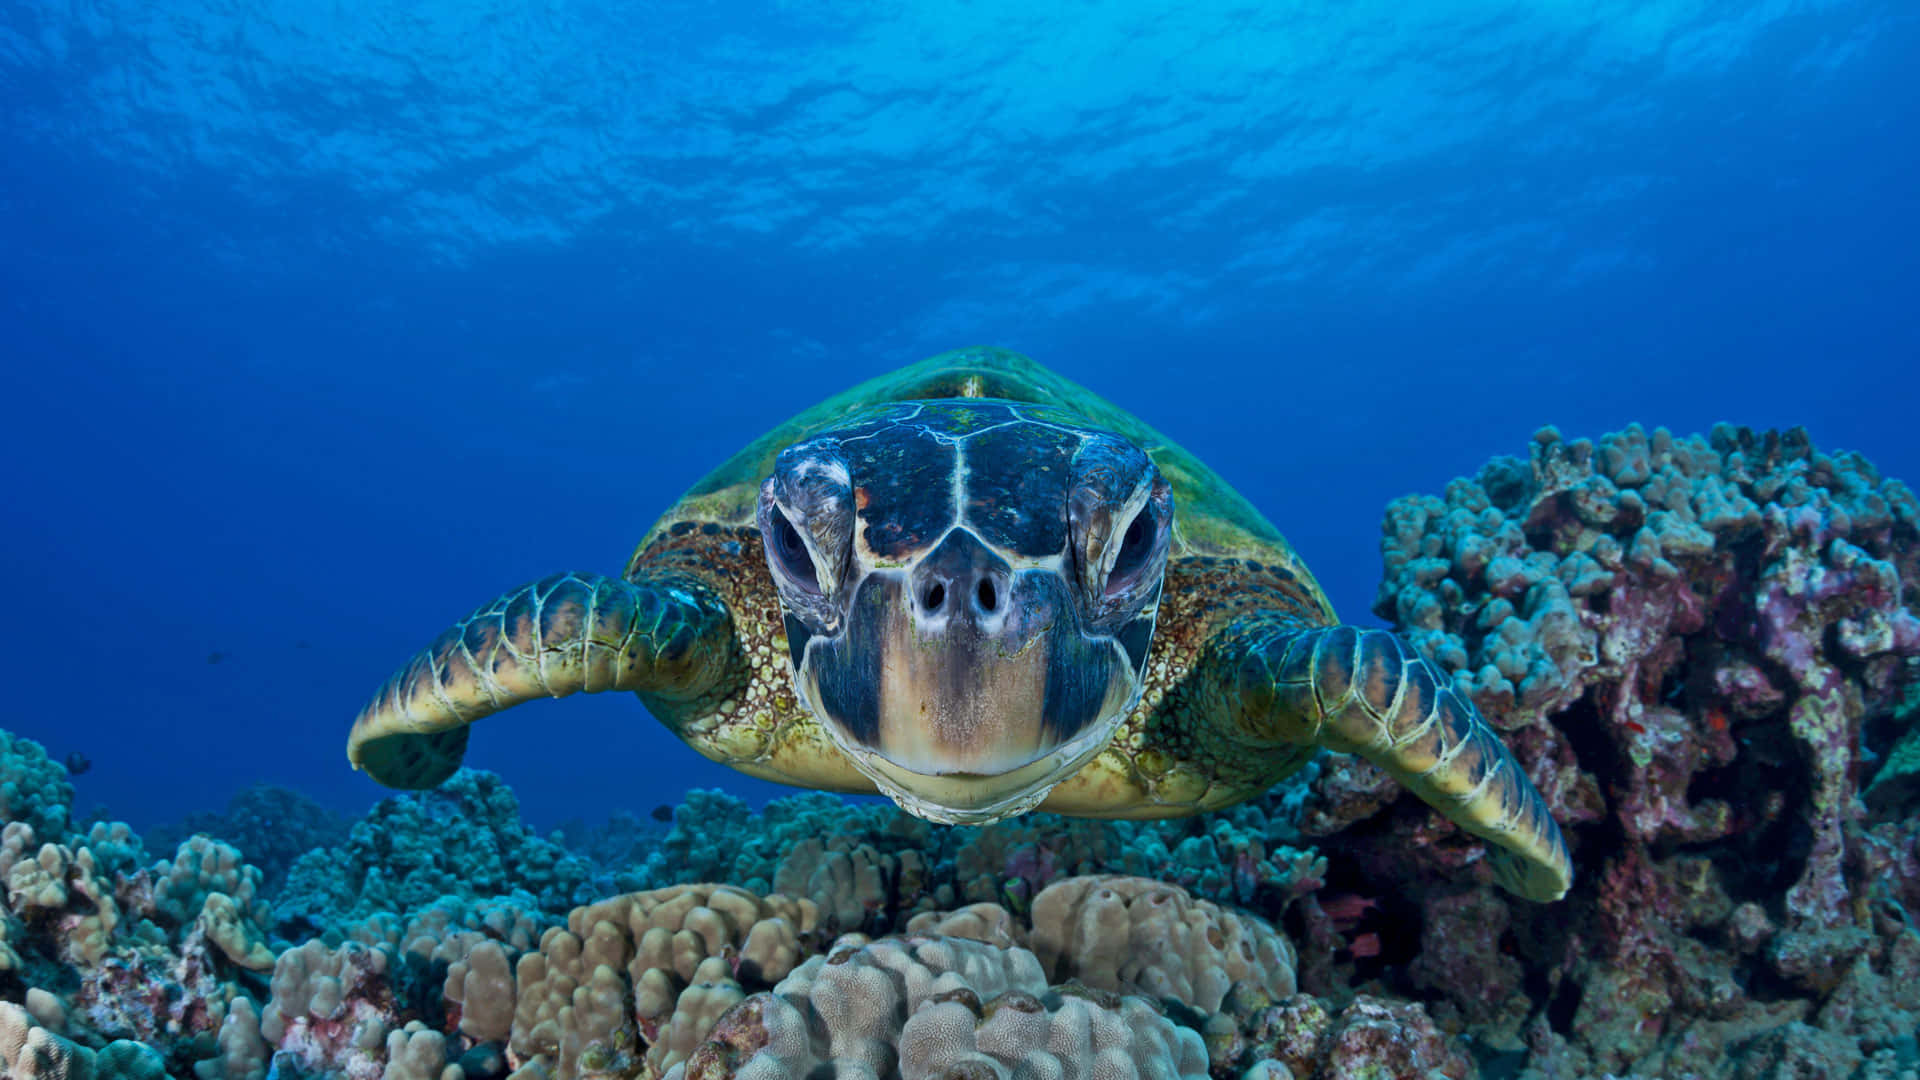 Caption: Majestic Sea Turtle Swimming in Crystal Clear Waters